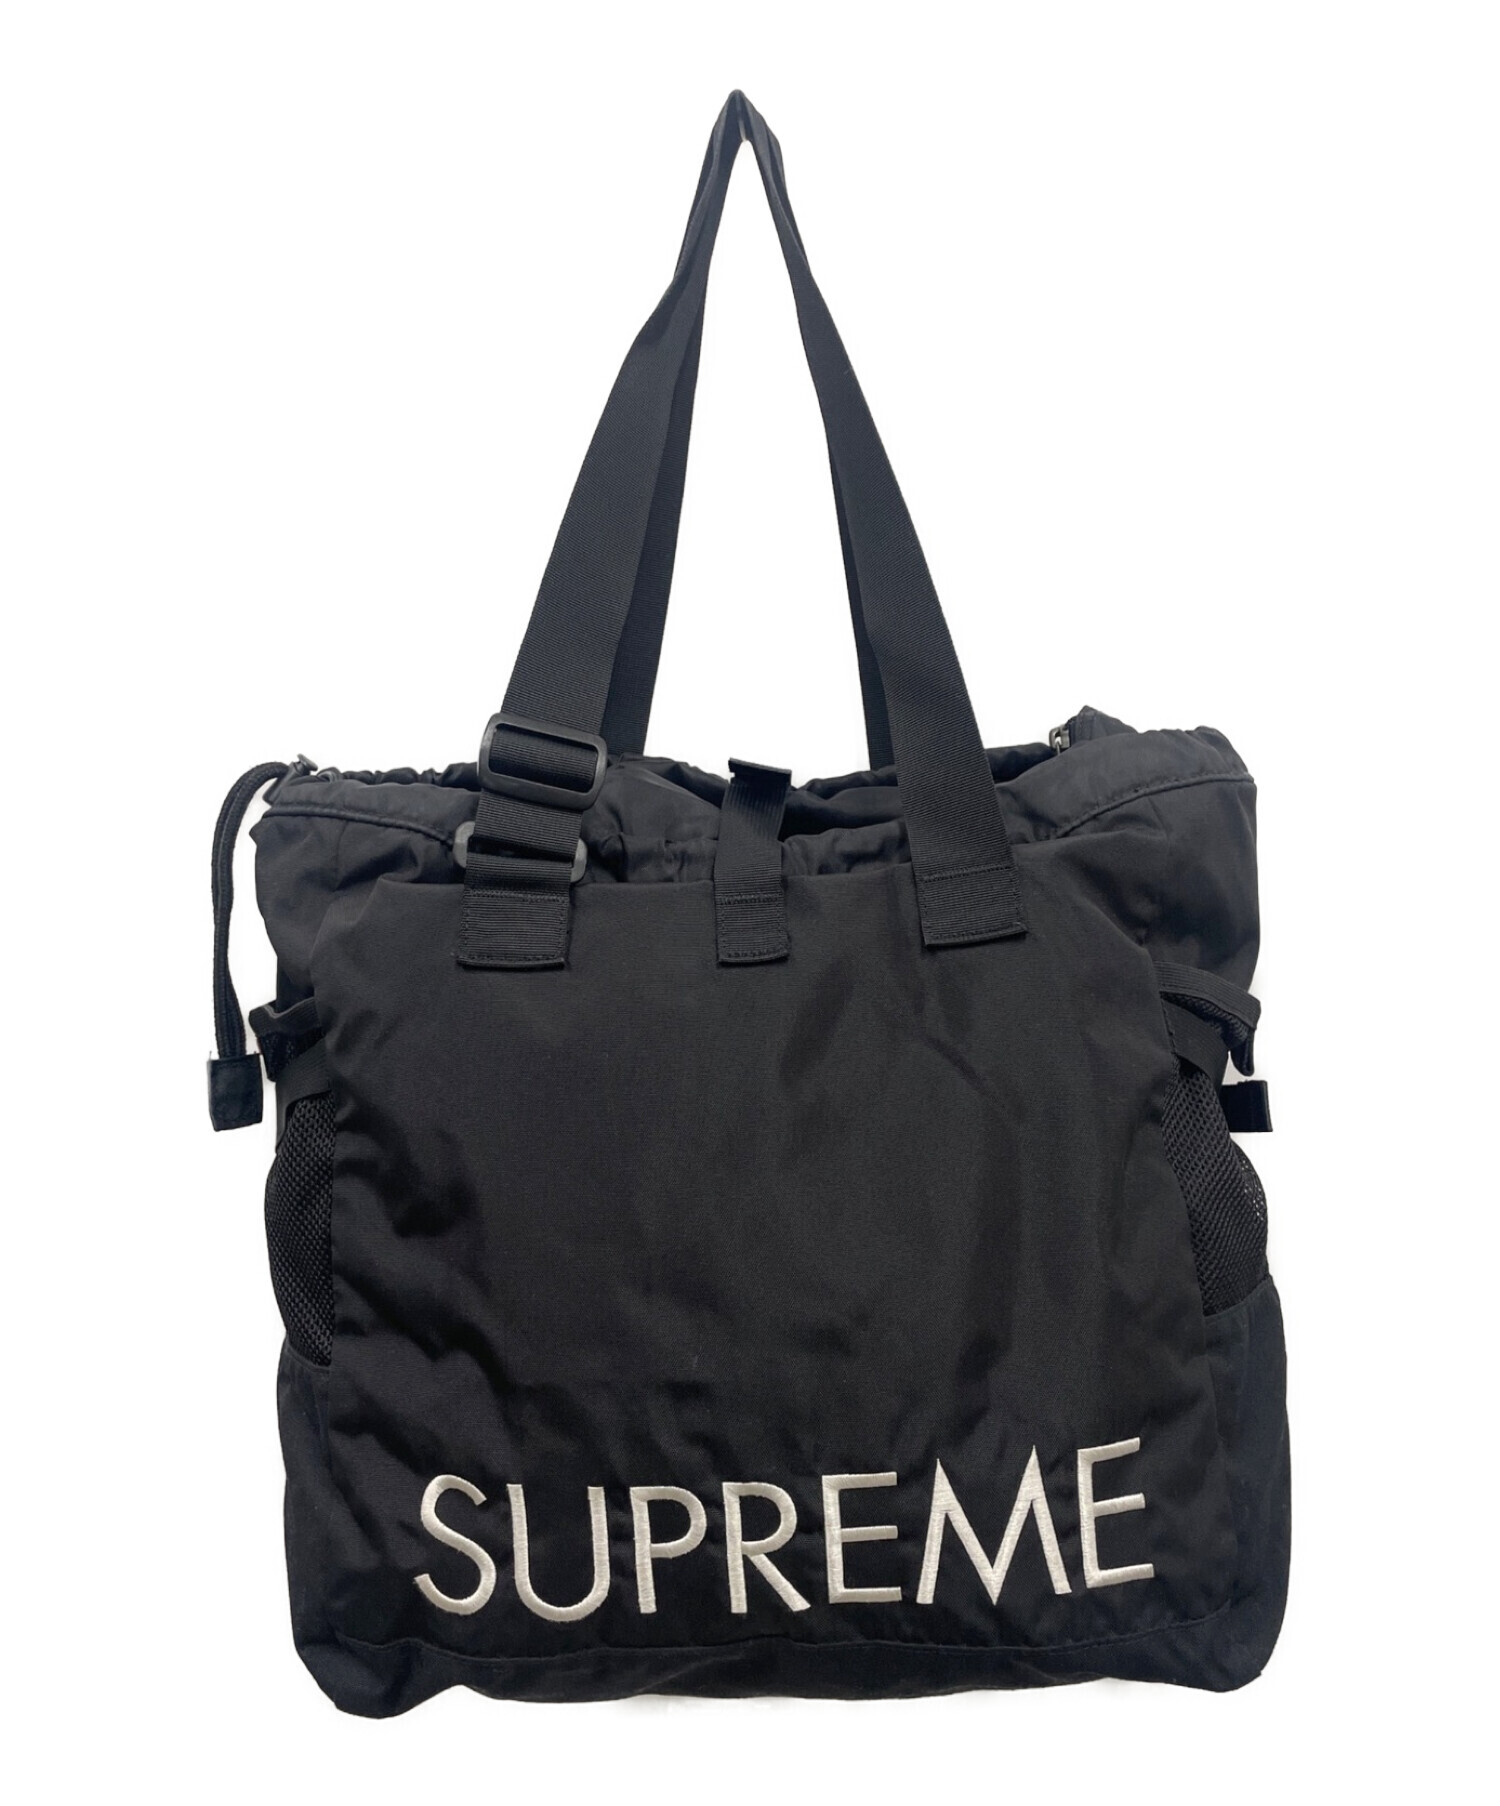 supreme north face adventure tote トートトートバッグ - トートバッグ